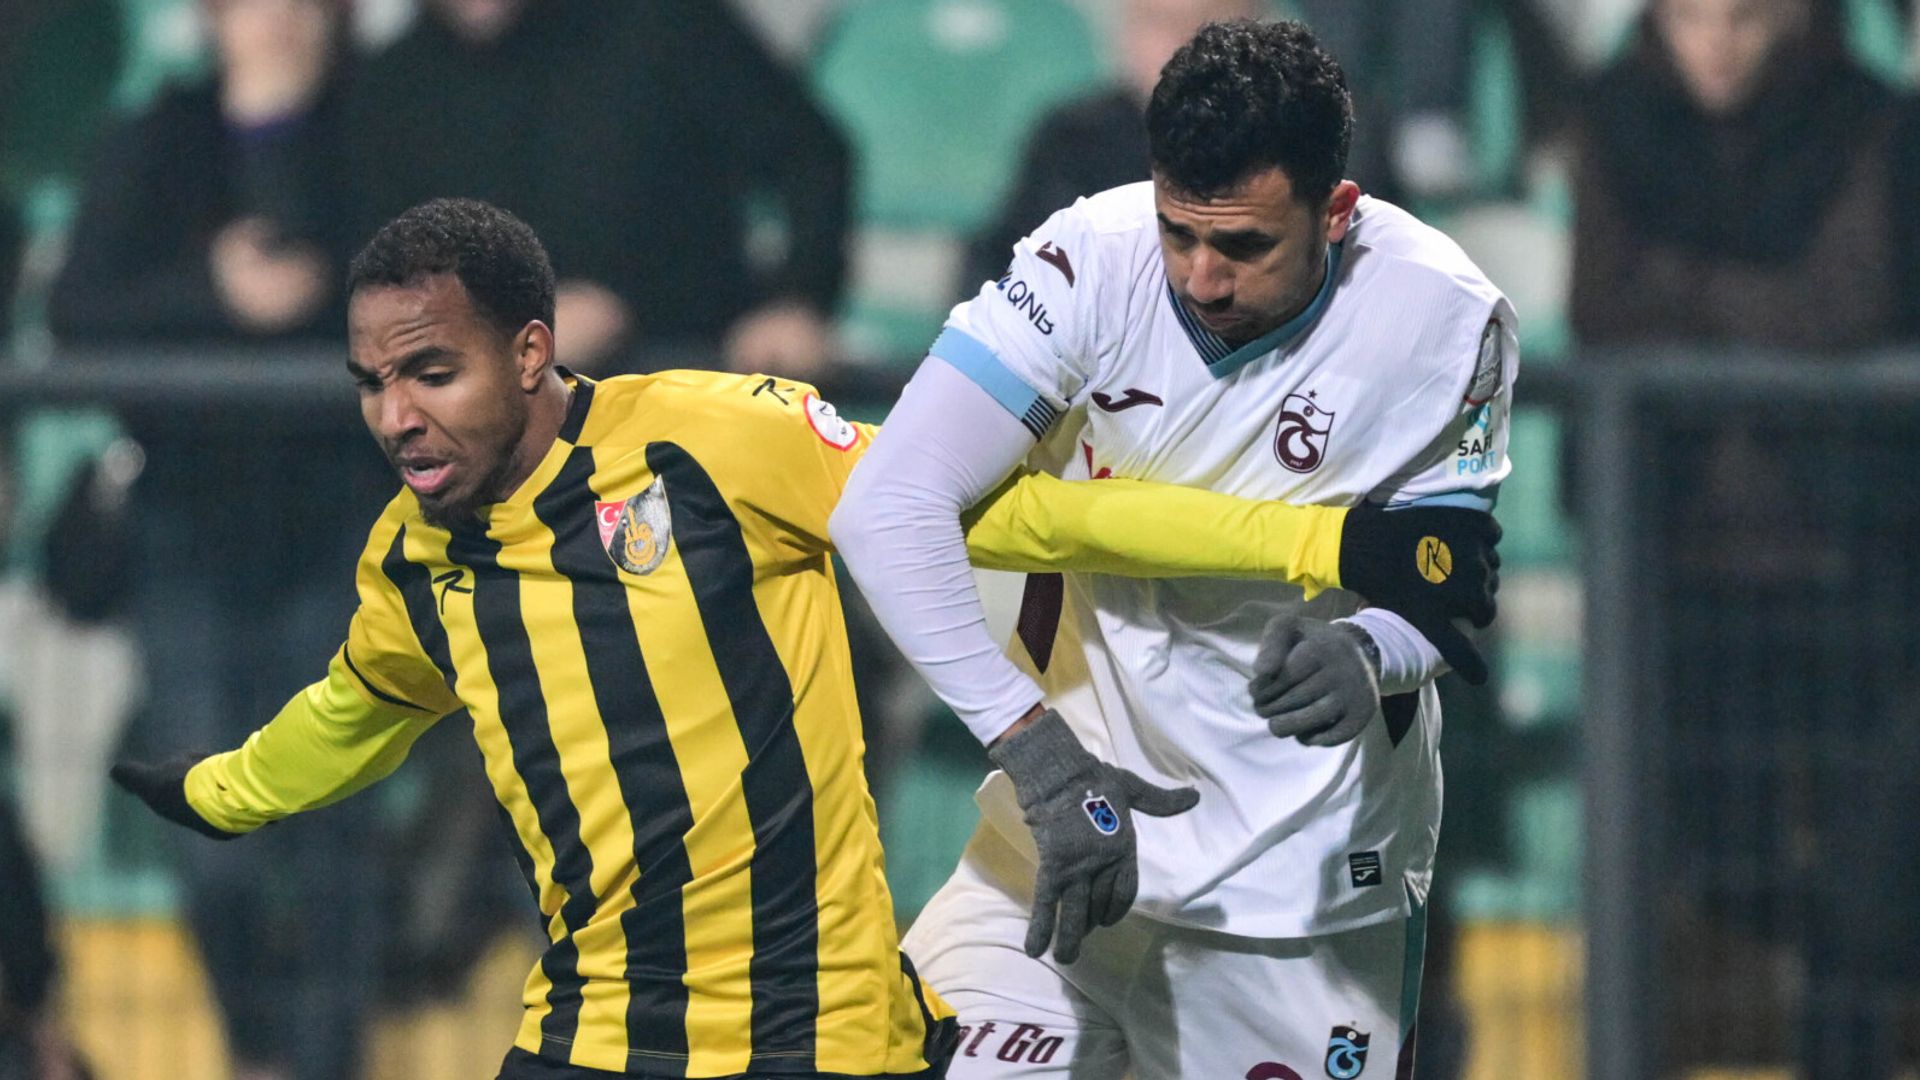 Turkish Super Lig controversy again as team called off pitch in protest